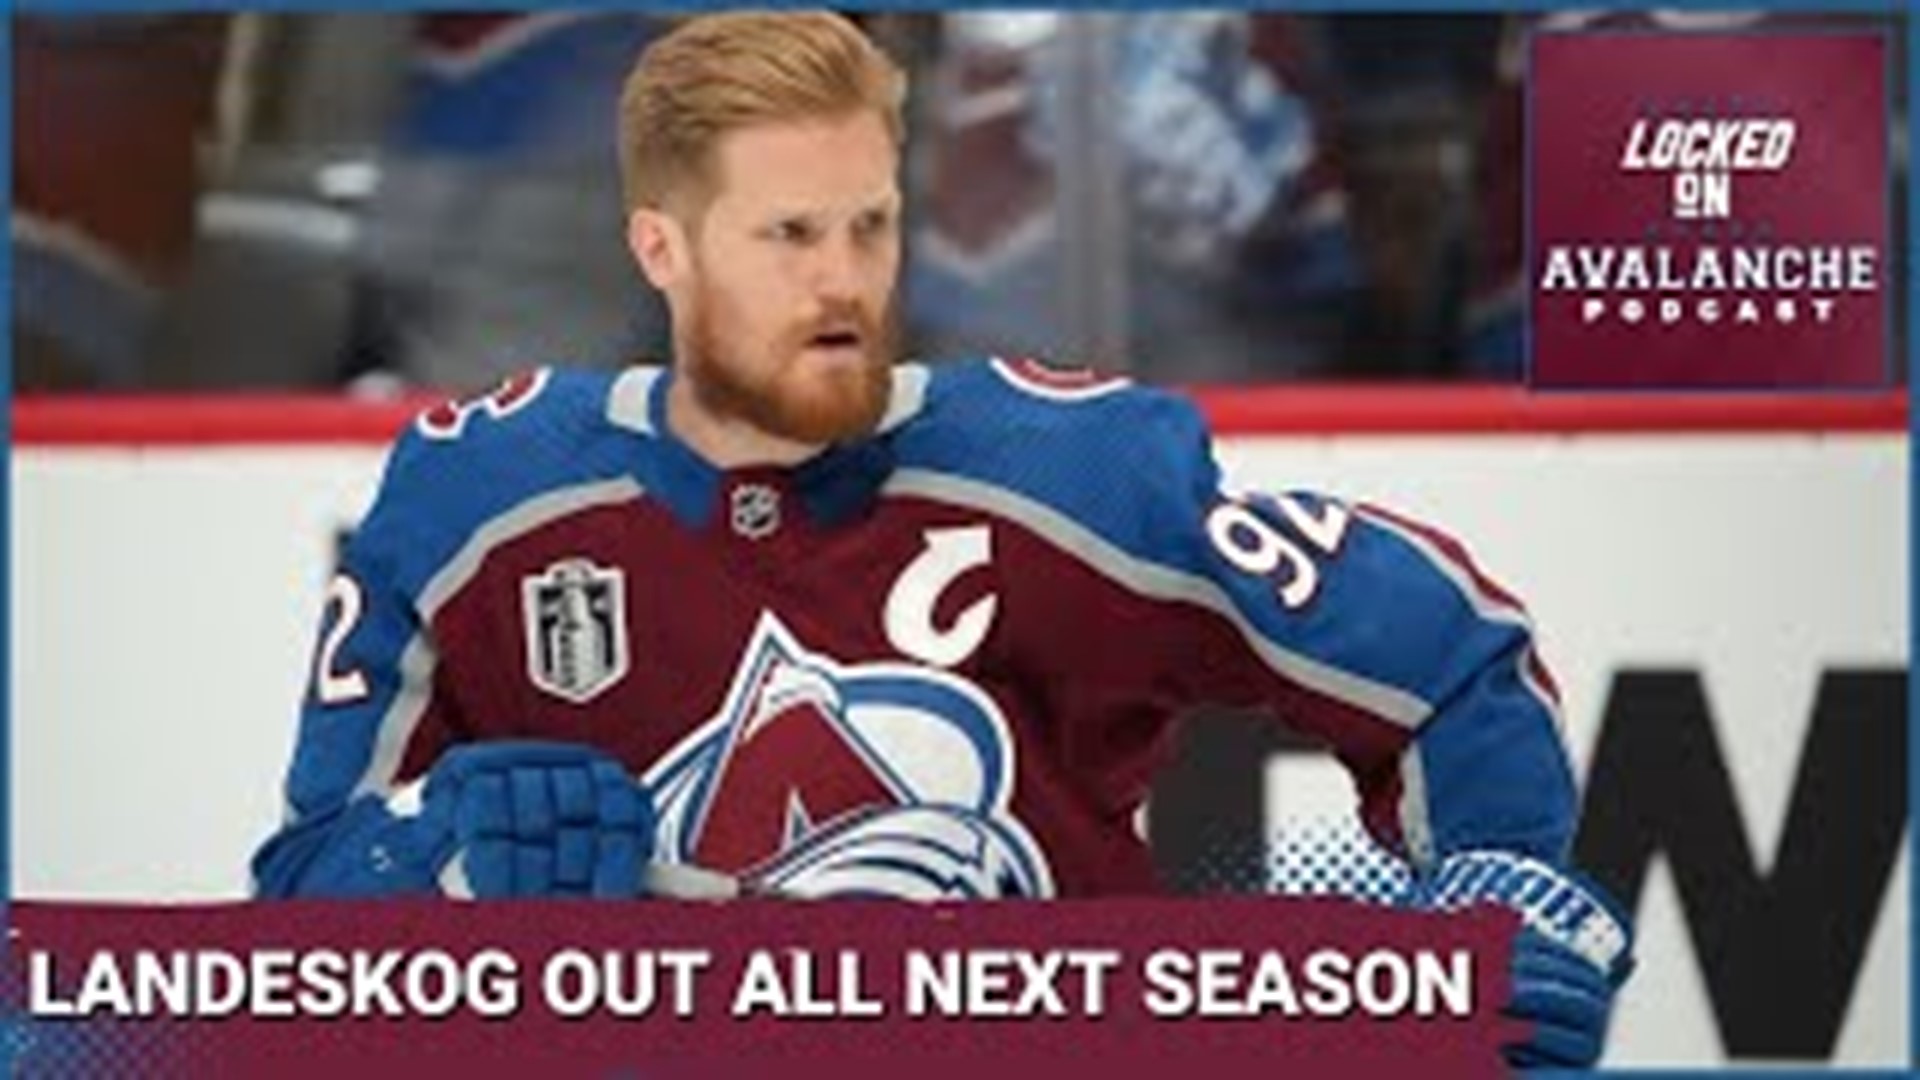 The Colorado Avalanche announced on Tuesday that Gabe Landeskog will have cartilage transplant surgery which will keep him out for the entire 2023-24 season.